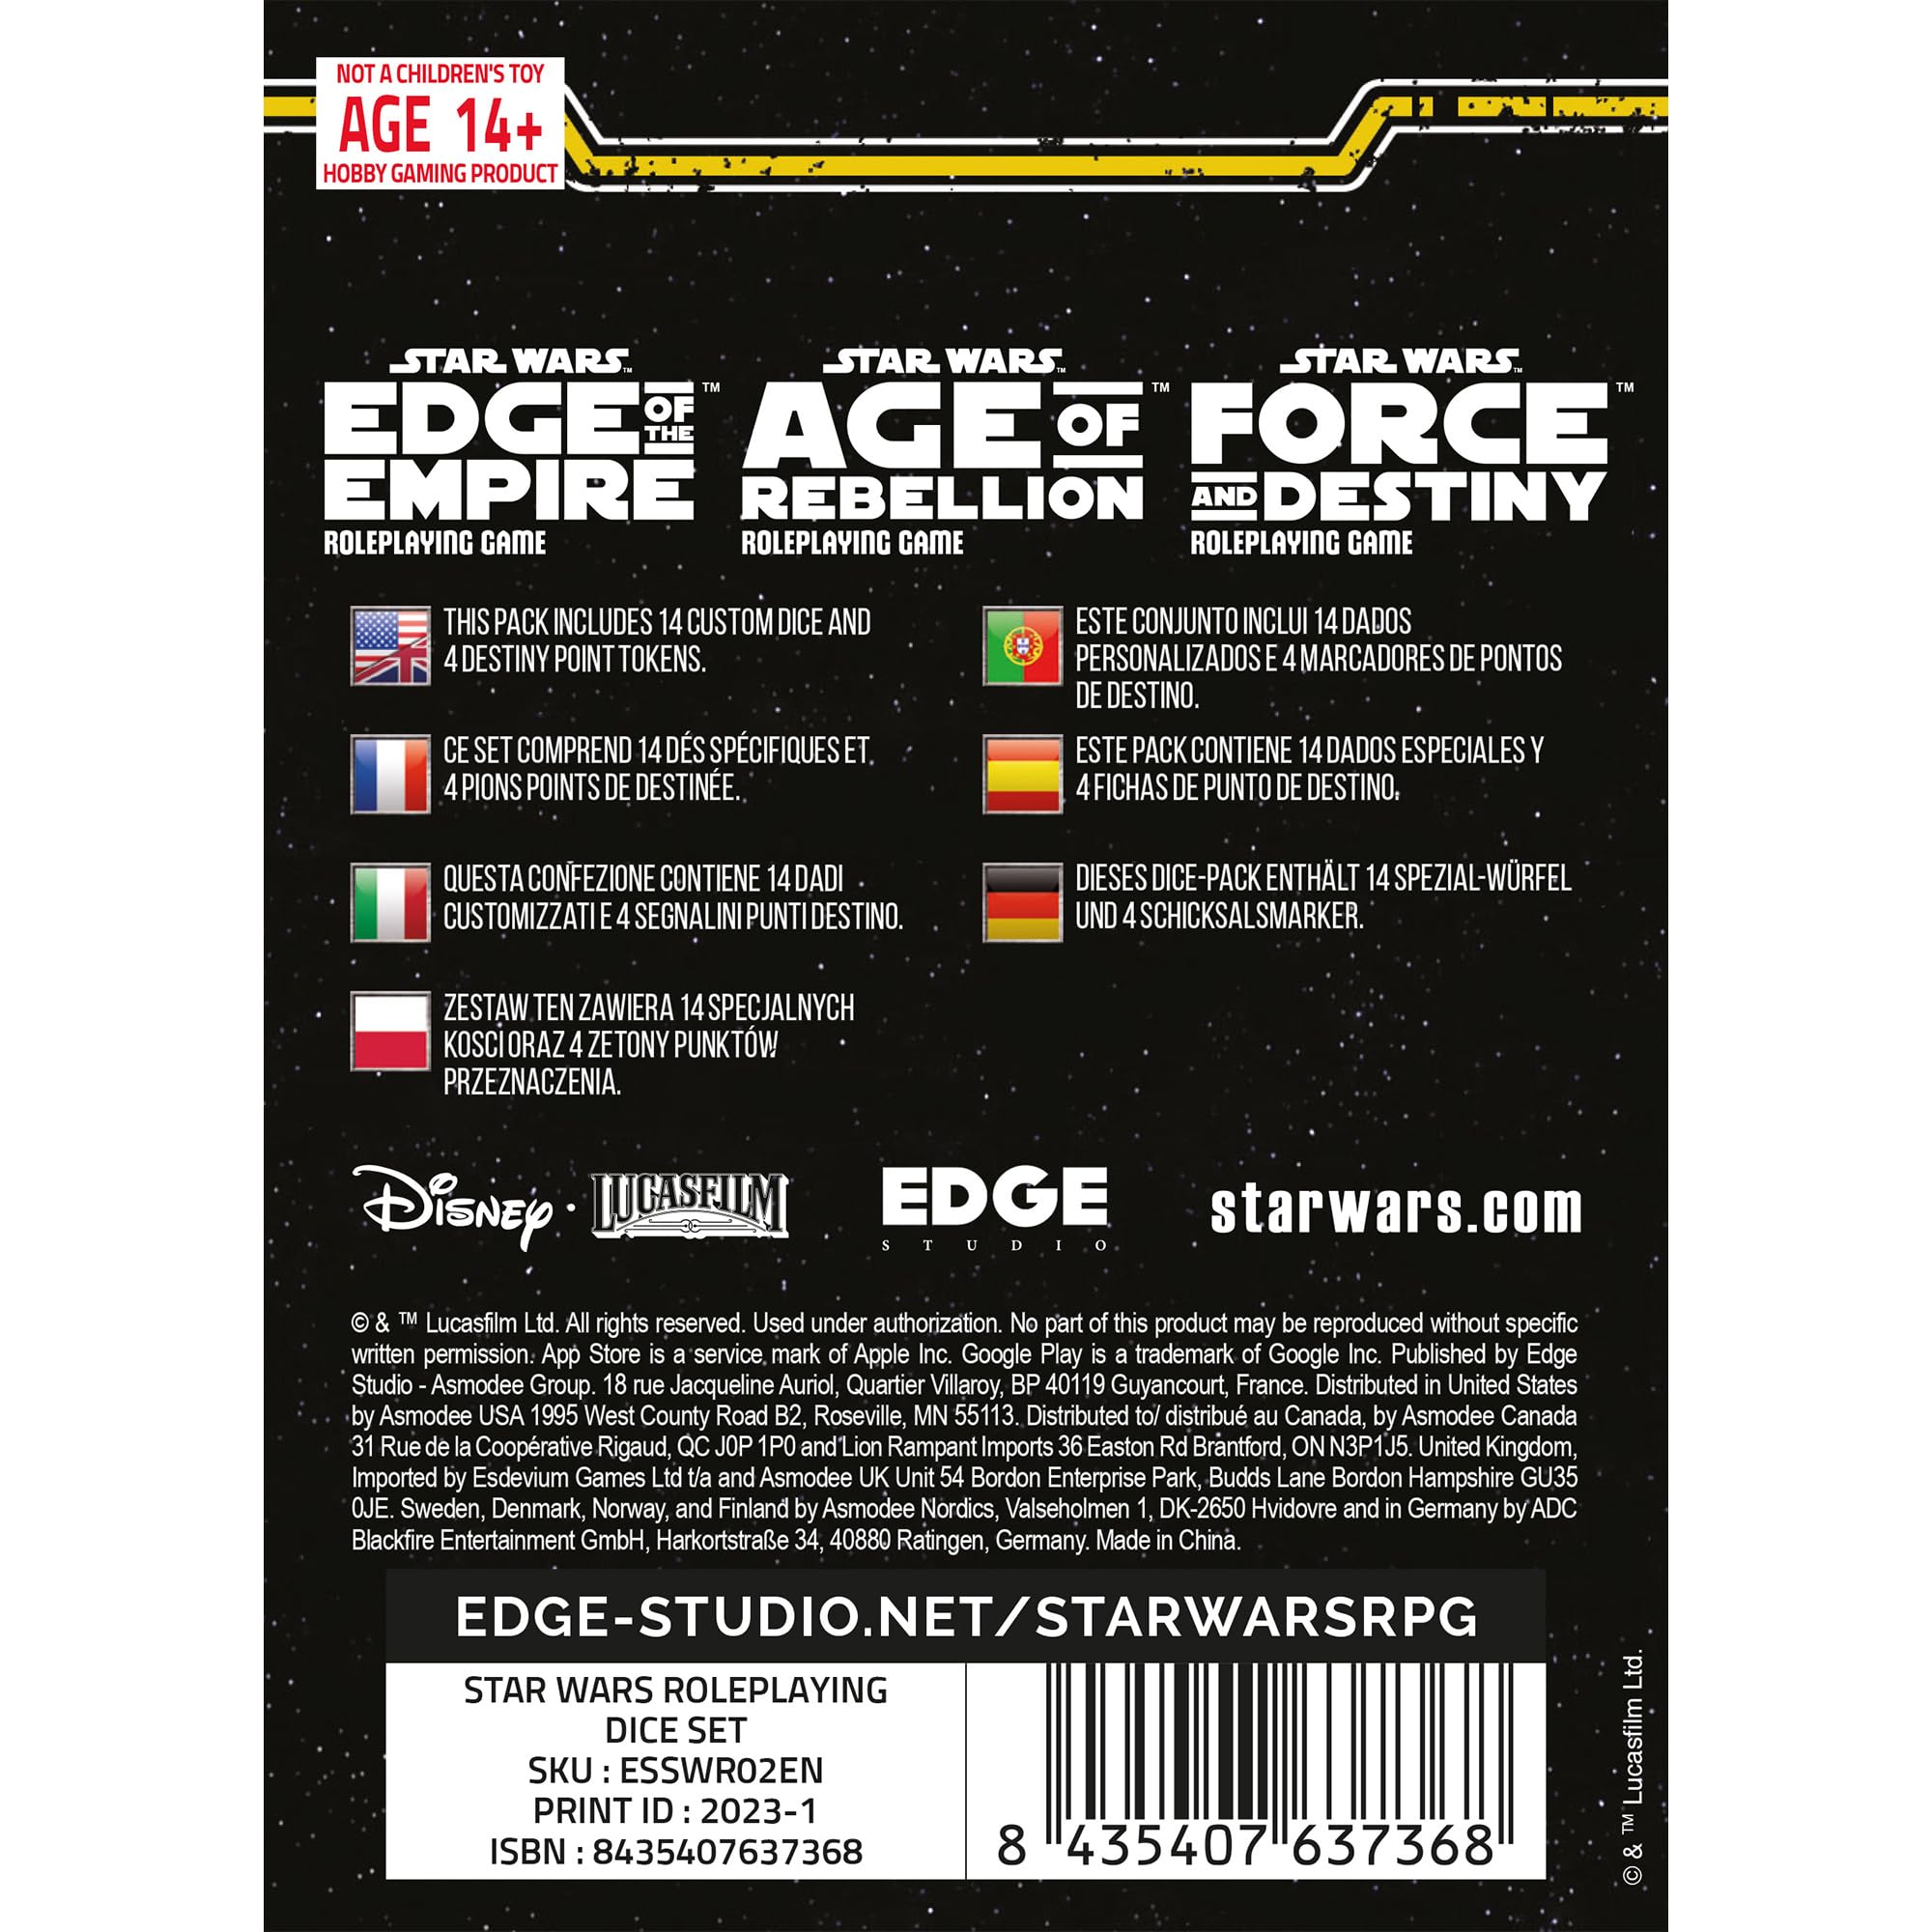 Star Wars Roleplaying Dice - Enhance Your Gameplay and Advance The Star Wars Narrative! Official Accessory for The Star Wars Roleplaying Game, Made by EDGE Studio